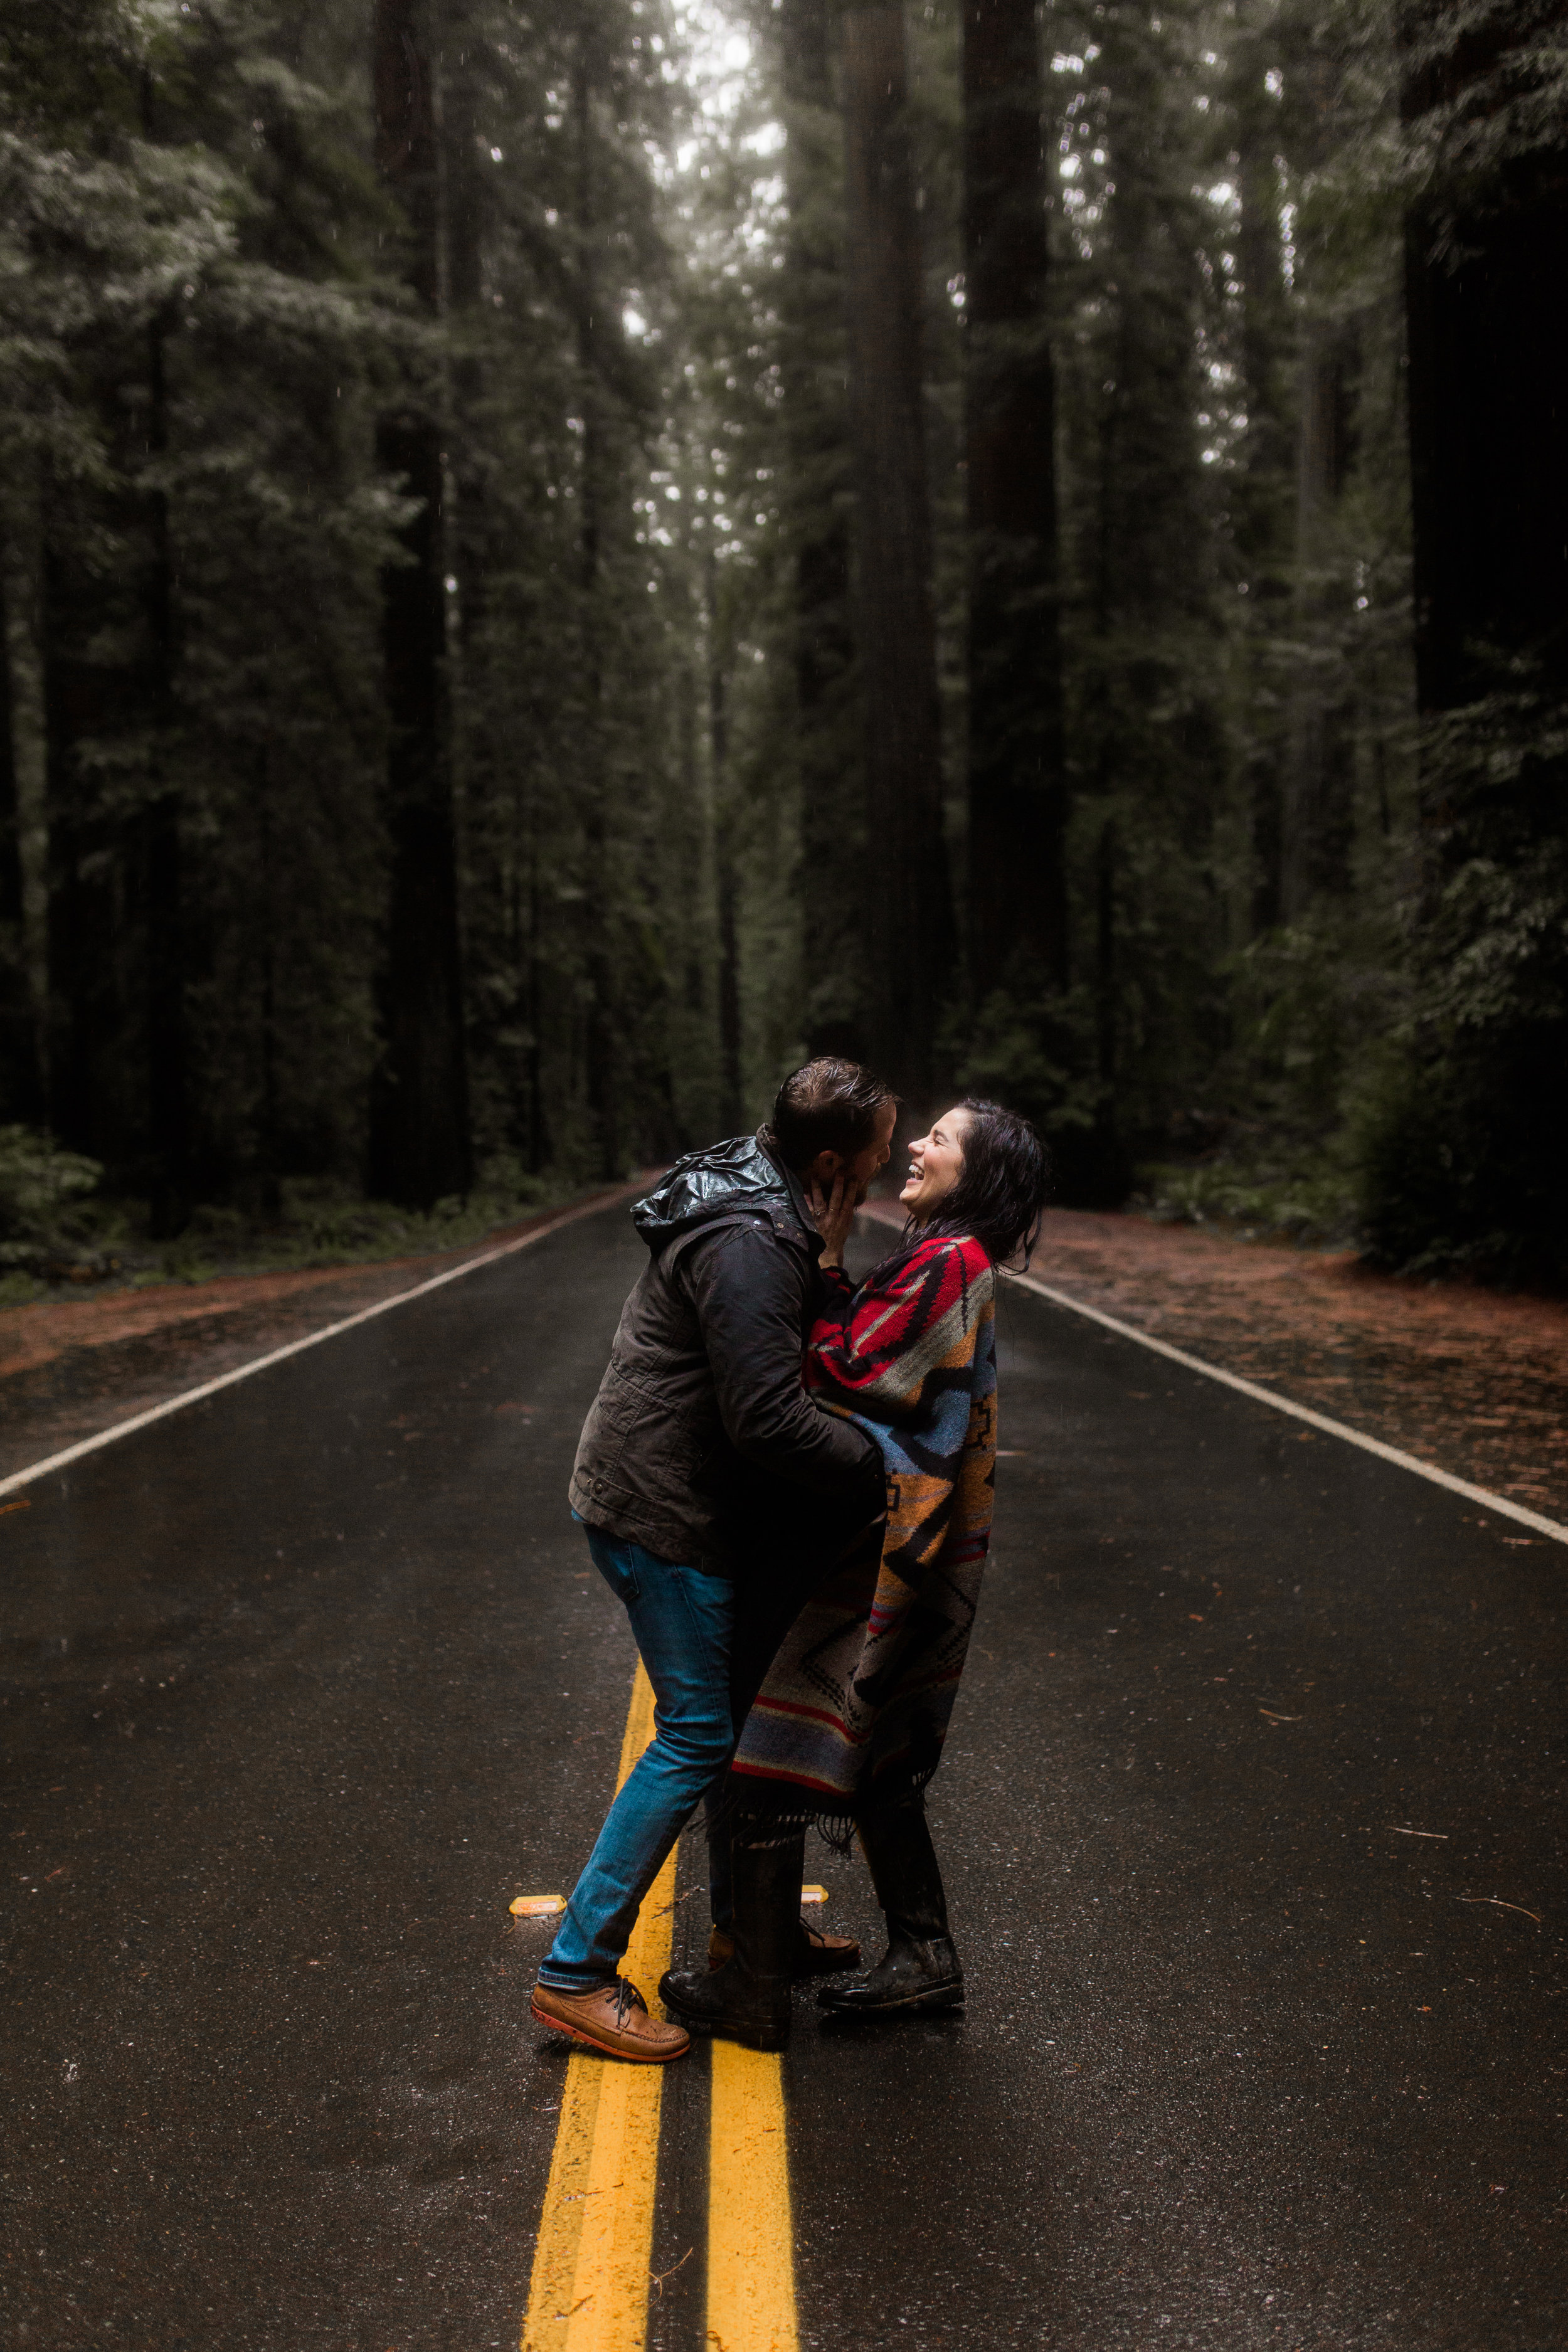 nicole-daacke-photography-redwoods-national-park-forest-rainy-foggy-adventure-engagement-session-humboldt-county-old-growth-redwood-tree-elopement-intimate-wedding-photographer-29.jpg